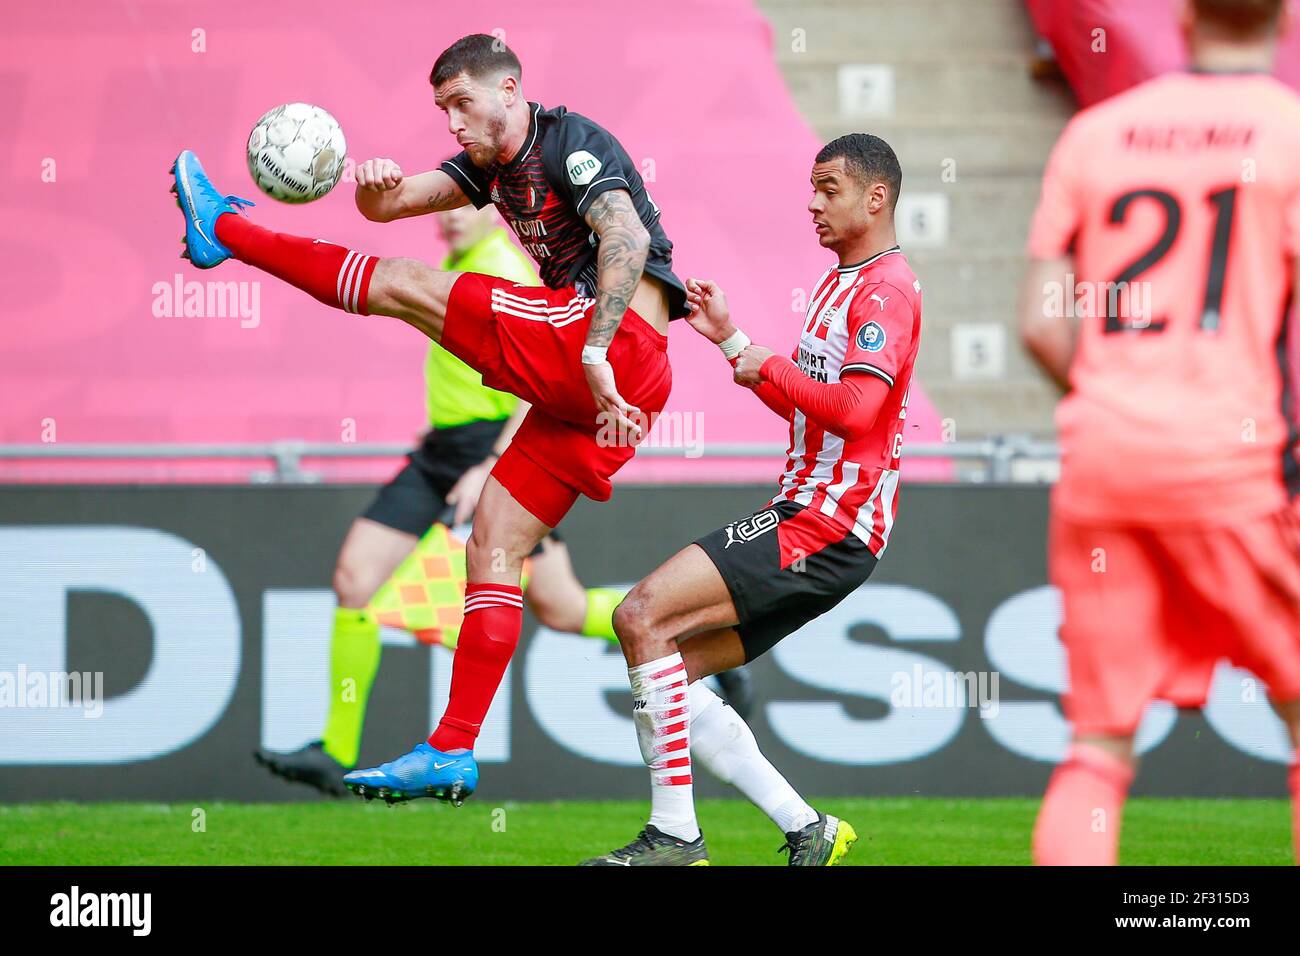 Eindhoven Netherlands March 14 Marcos Senesi Of Feyenoord And Cody Gakpo Of Psv Eindhoven During The Dutch Eredivisie Match Between Psv And Feyeno Stock Photo Alamy